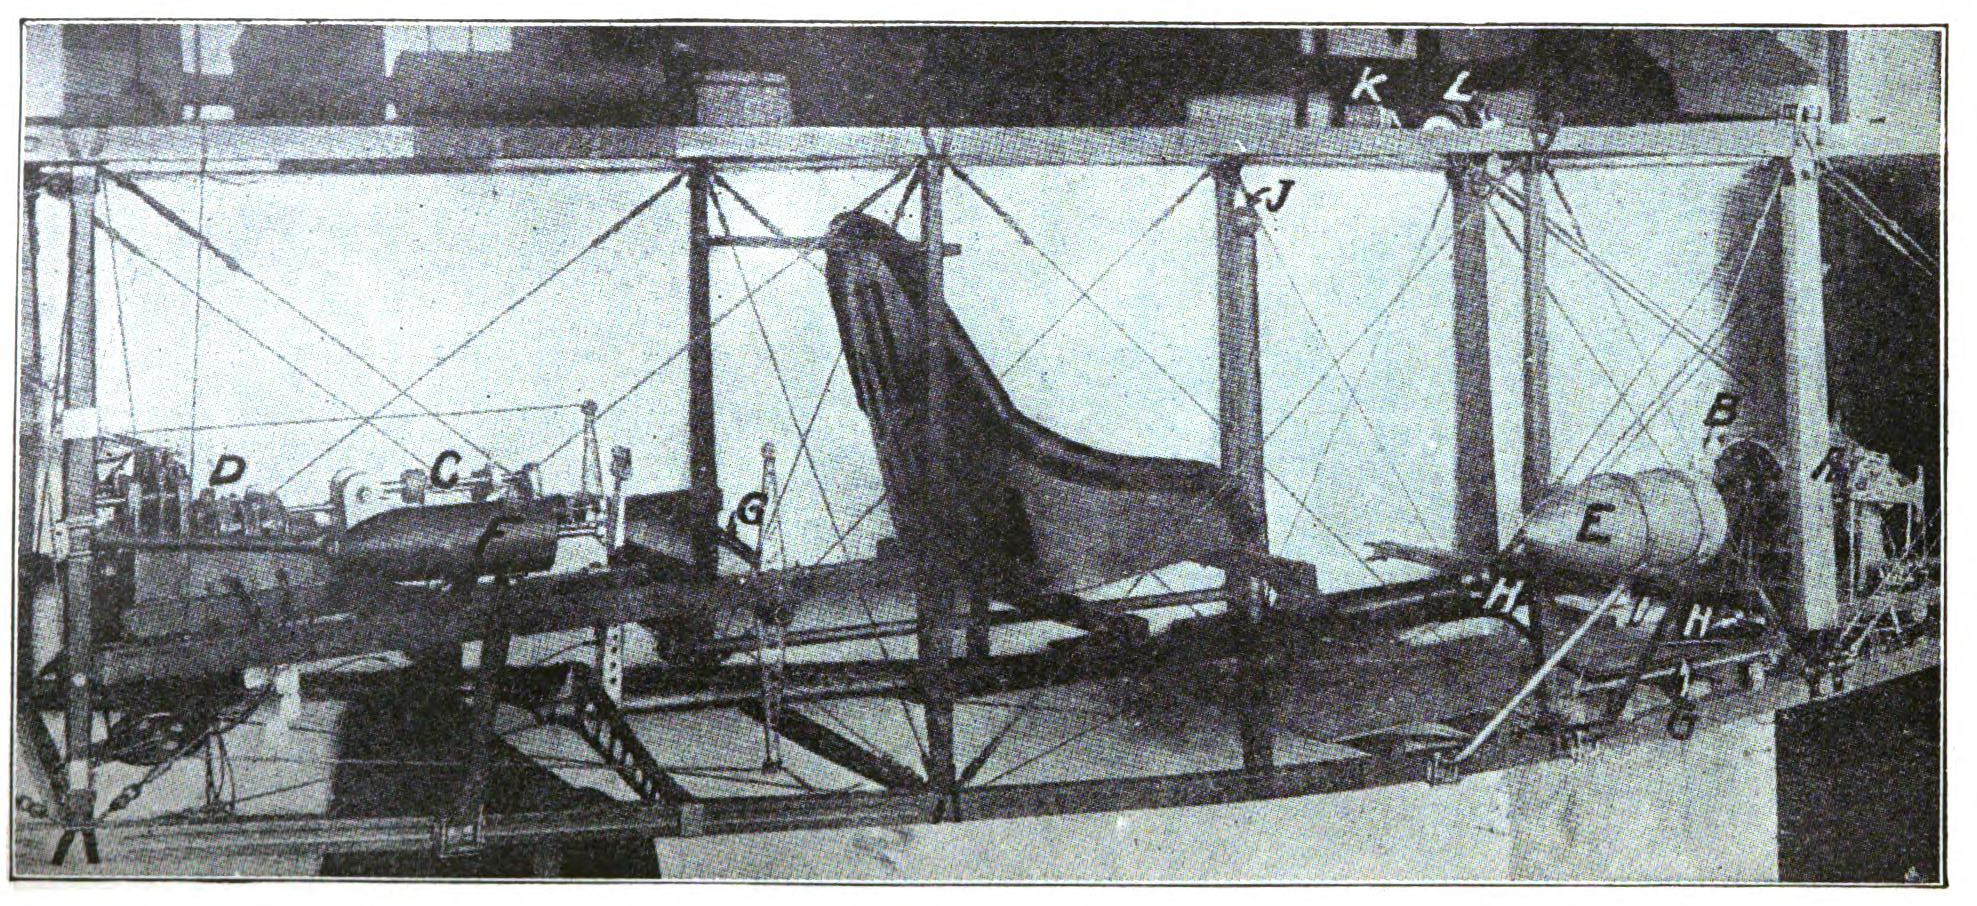 Automatic Control System (Sperry) Installed in Fuselage of Curtiss Tractor Biplane.